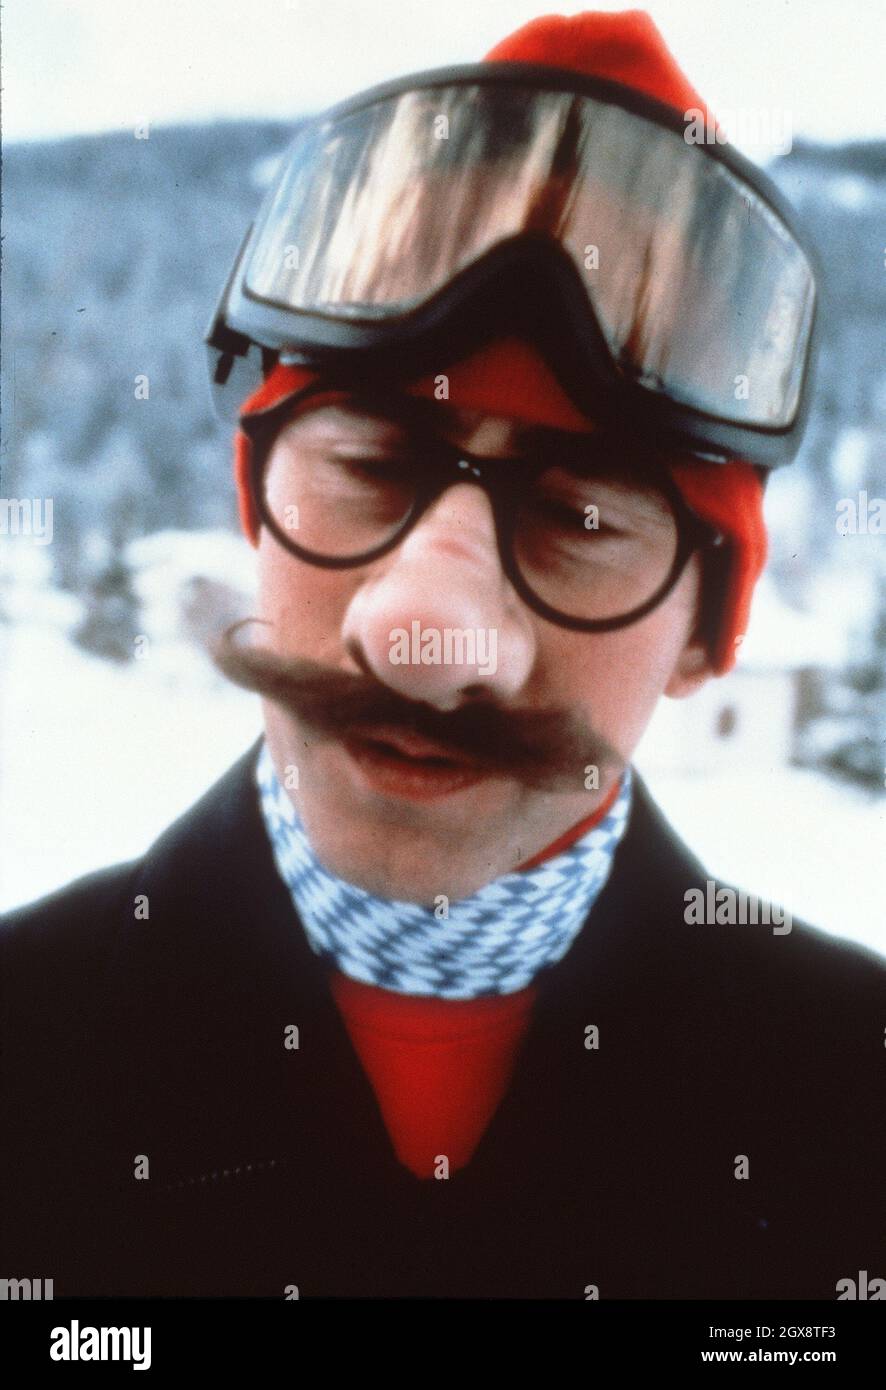 The Prince of Wales plays a joke on the press. Whilst on a skiing holiday in Klosters in 1980 he pretended to be somebody called 'Uncle harry'. Anwar Hussein/allactiondigital.com  Stock Photo